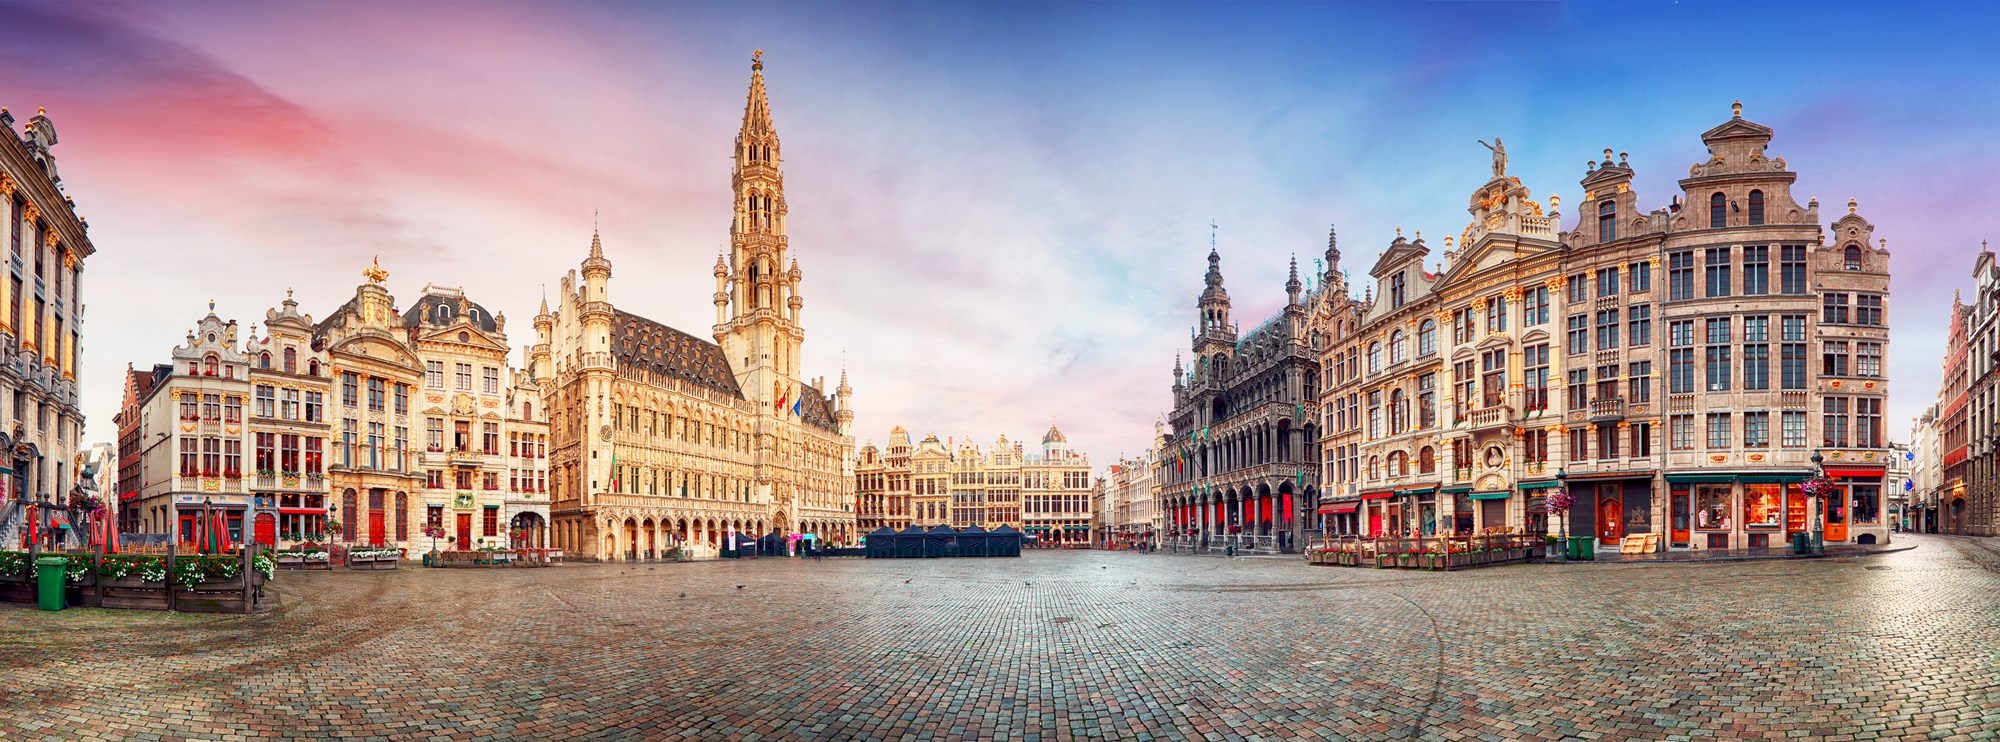 Empty Grand Place - Brussels